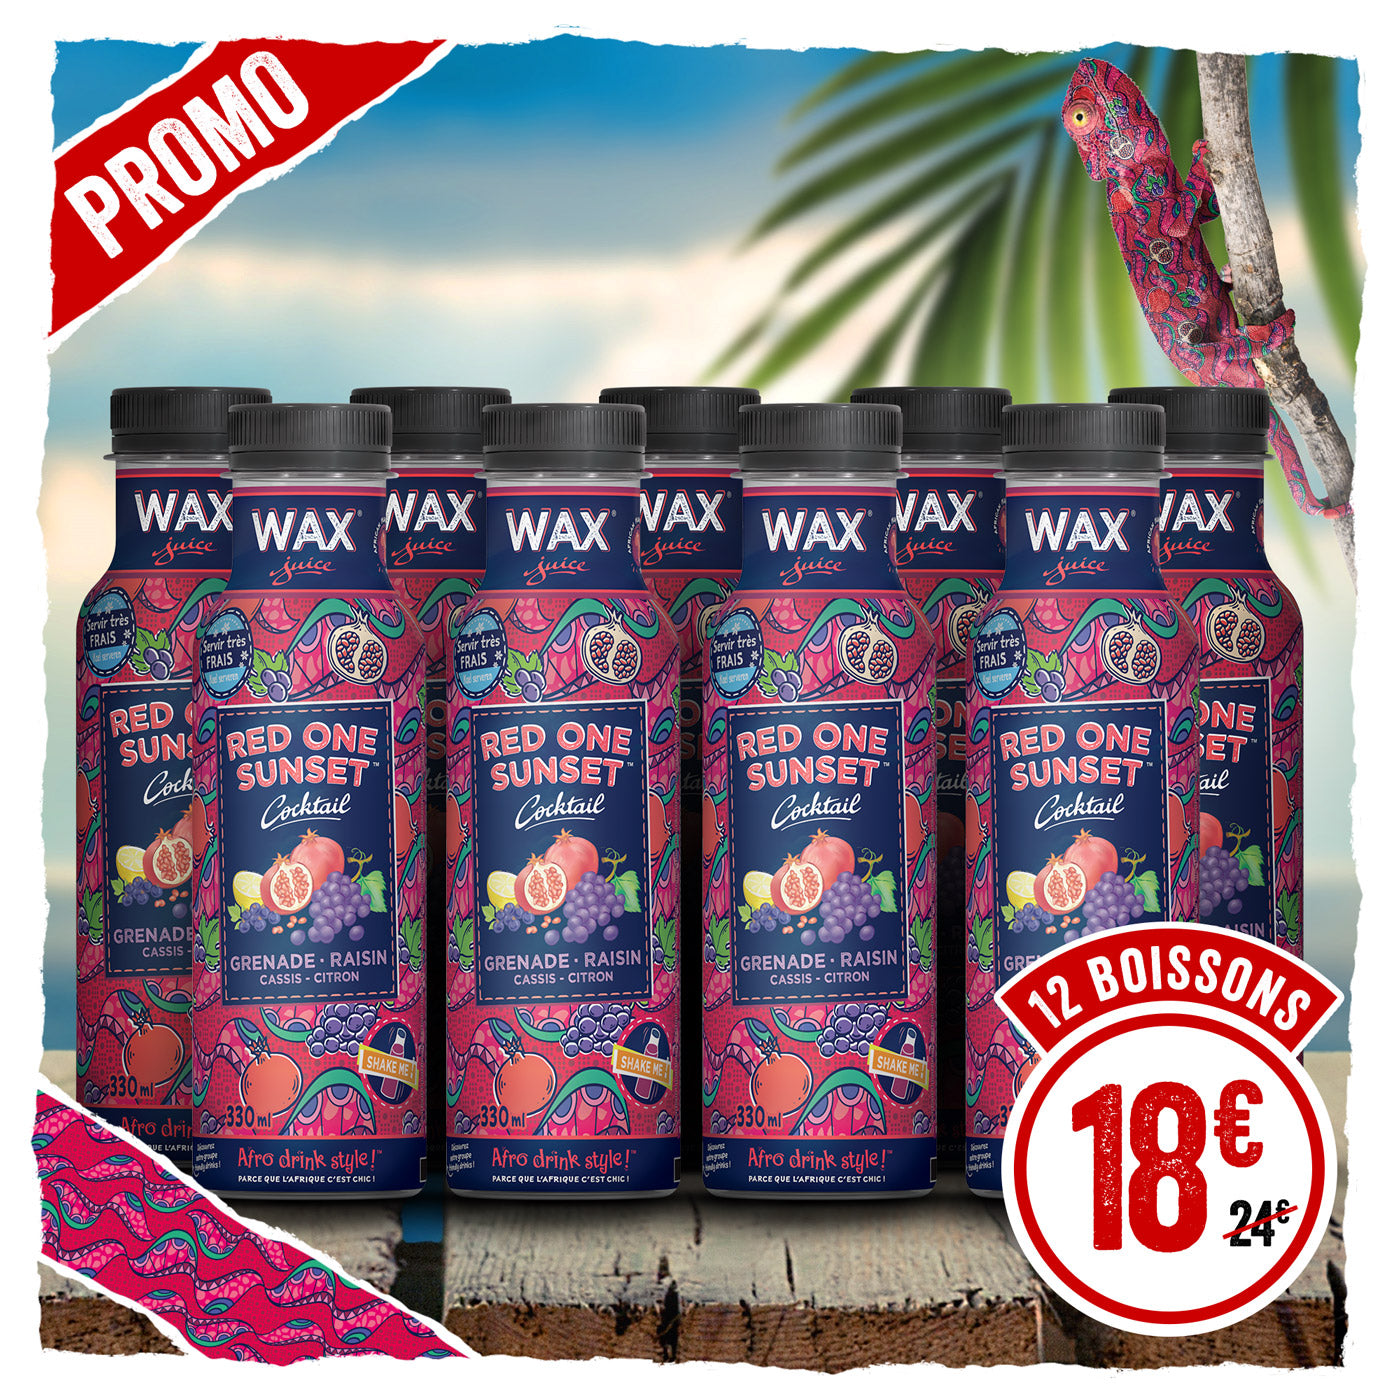 Colis de 12 <br> Wax Red One Sunset